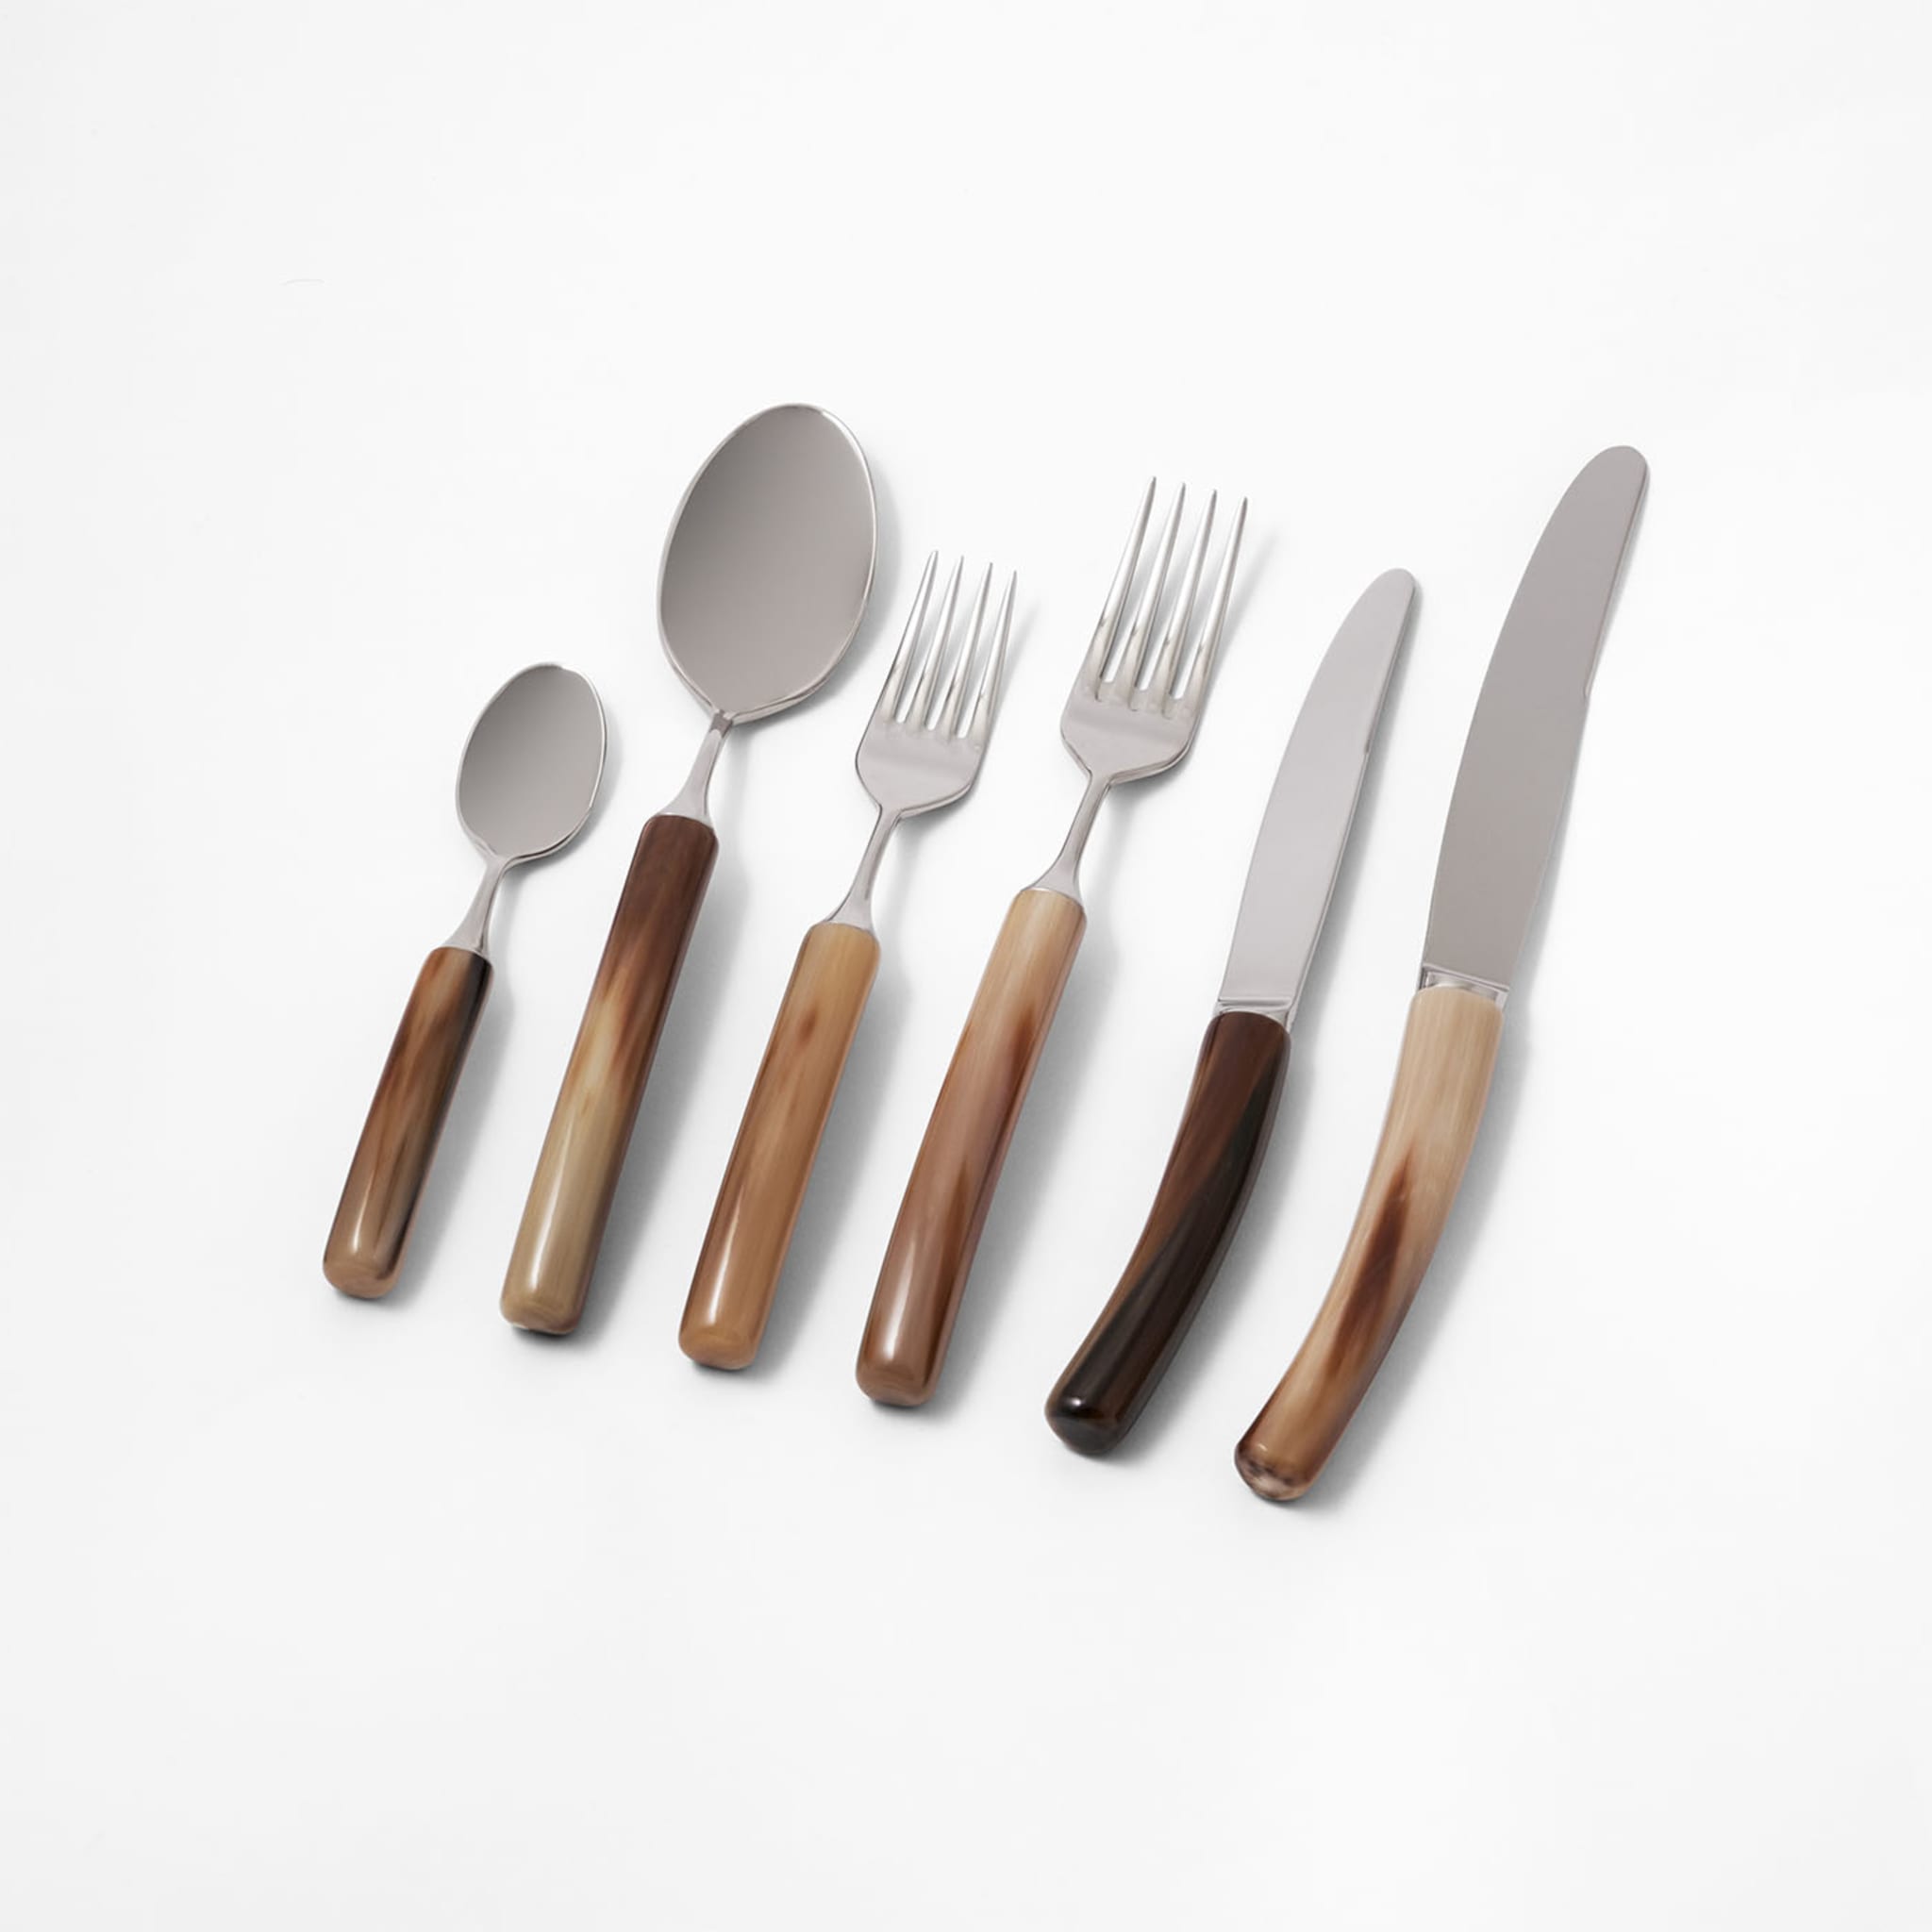 Classic Table Cutlery Set - Alternative view 1